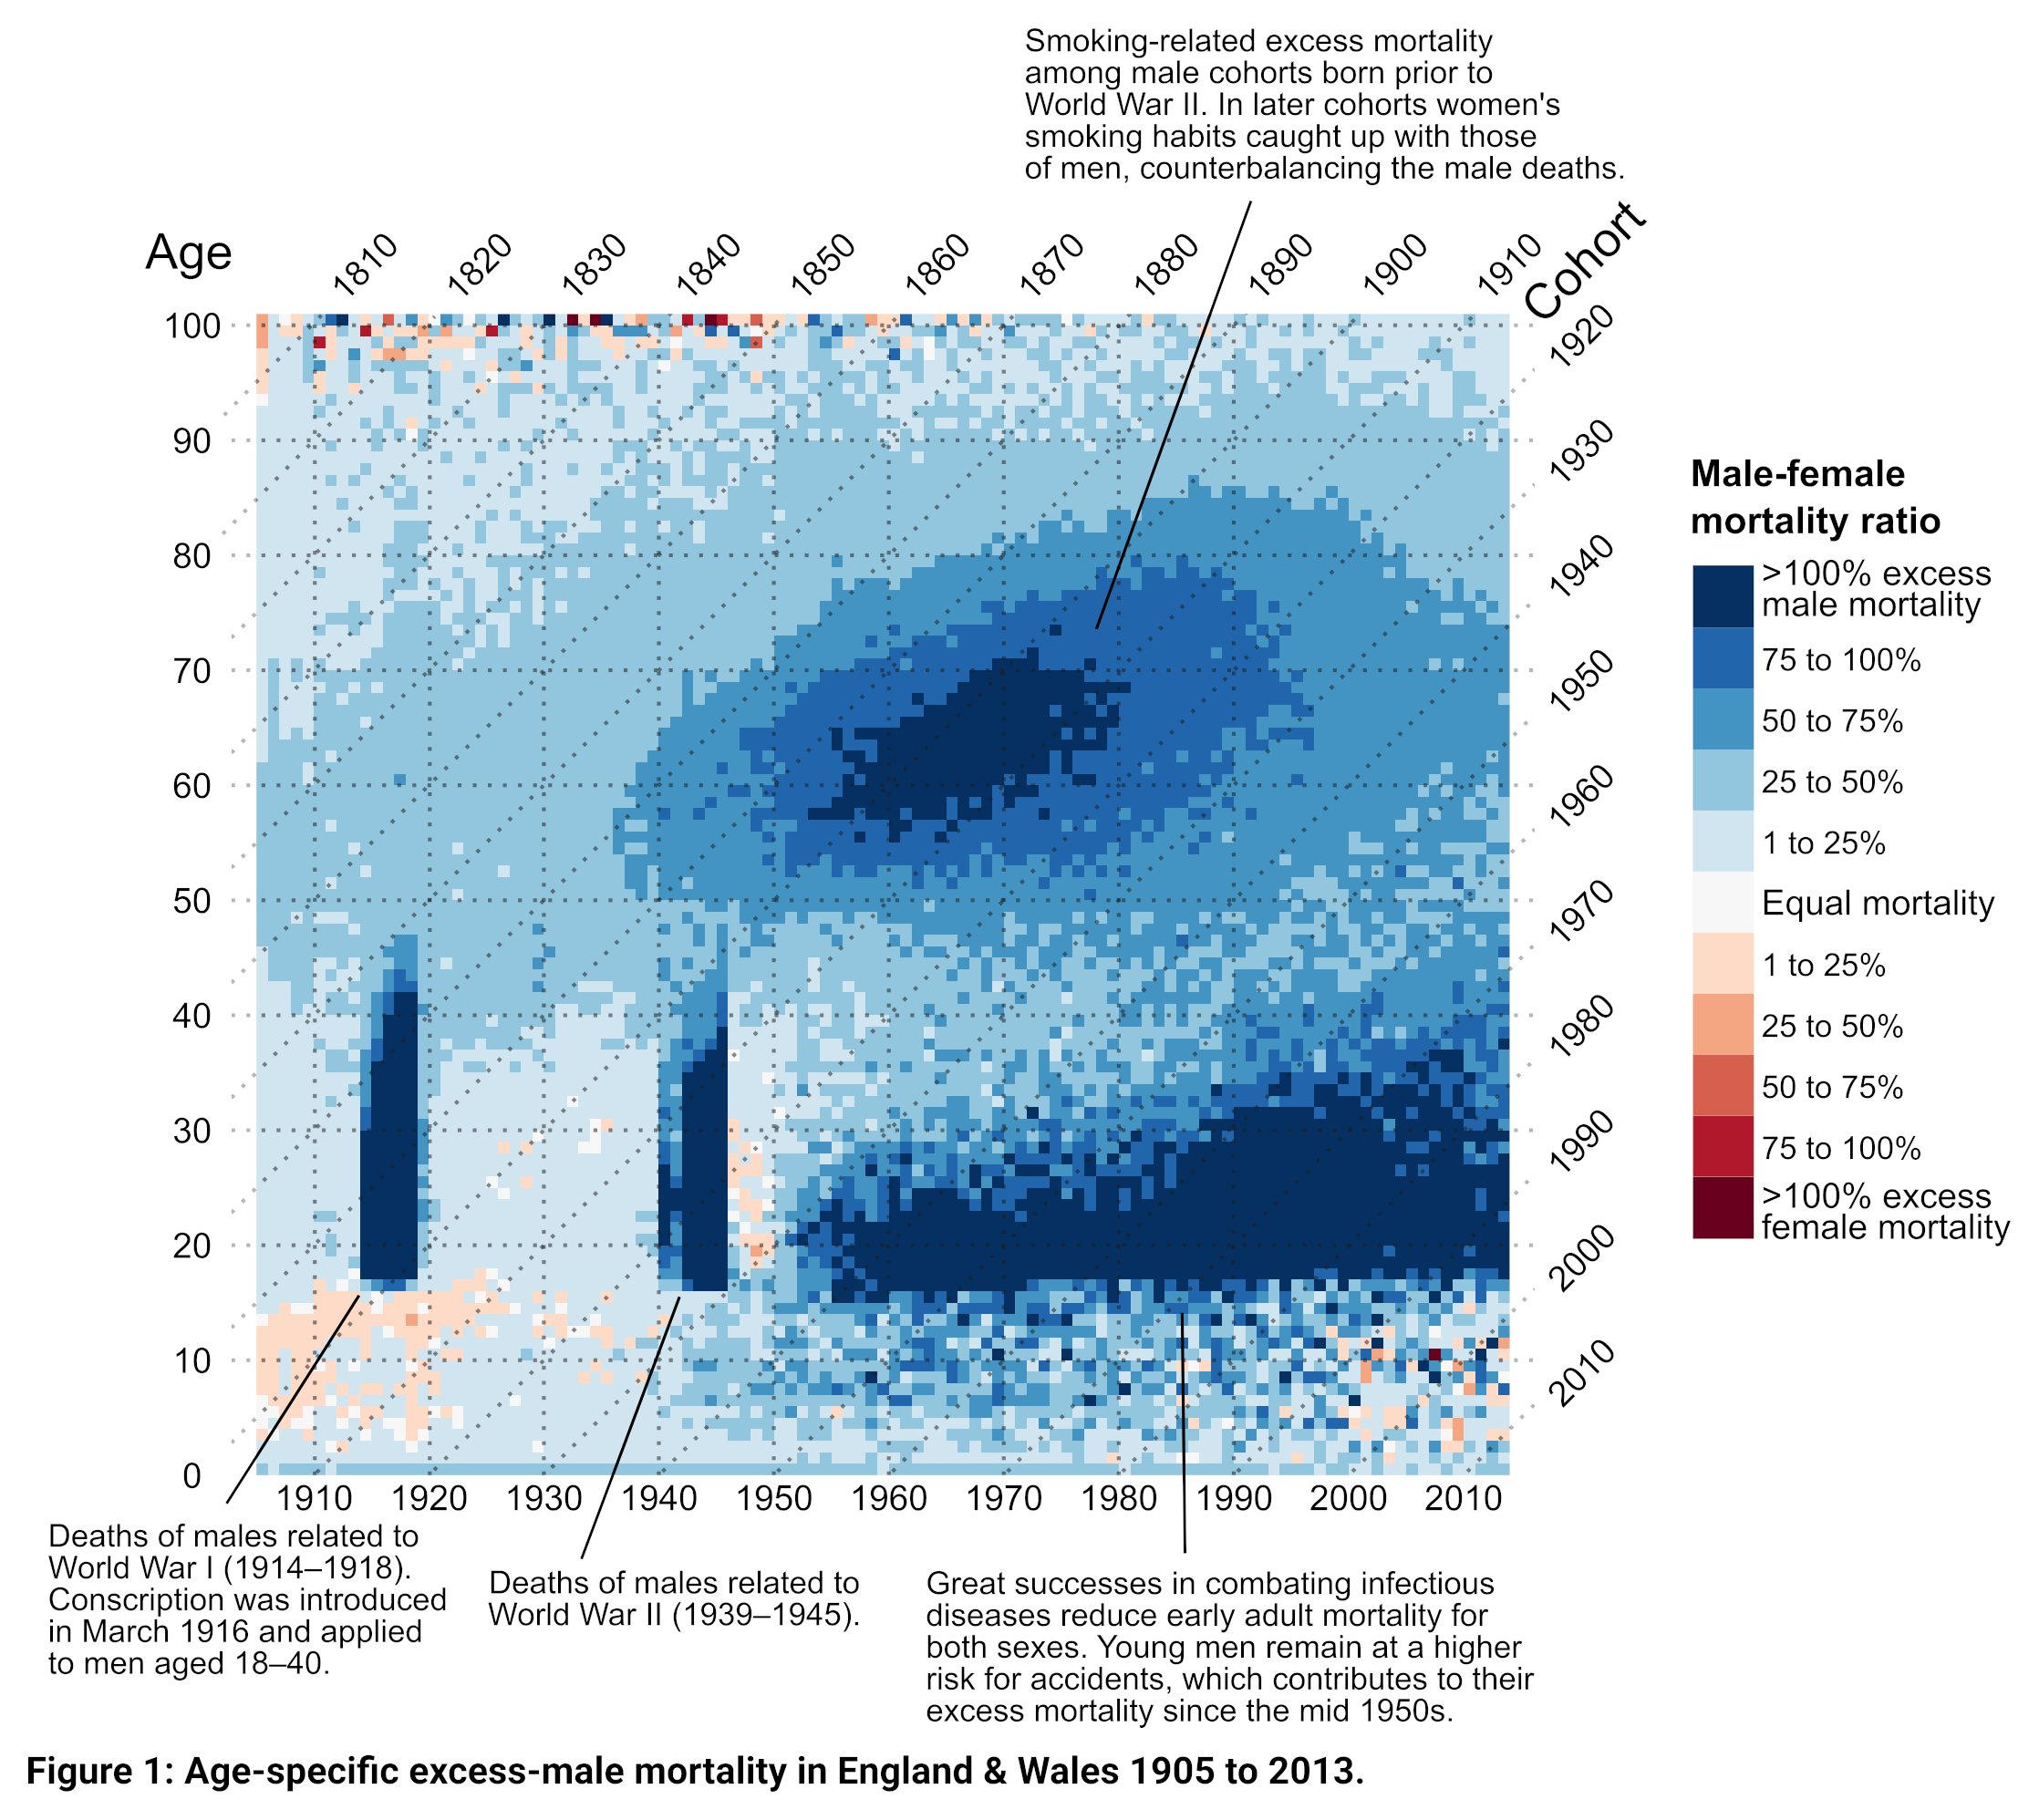 A heatmap of the male-female mortality ratio in England and Wales from 1905 to 2013. 4 annotations explain the patterns in the chart